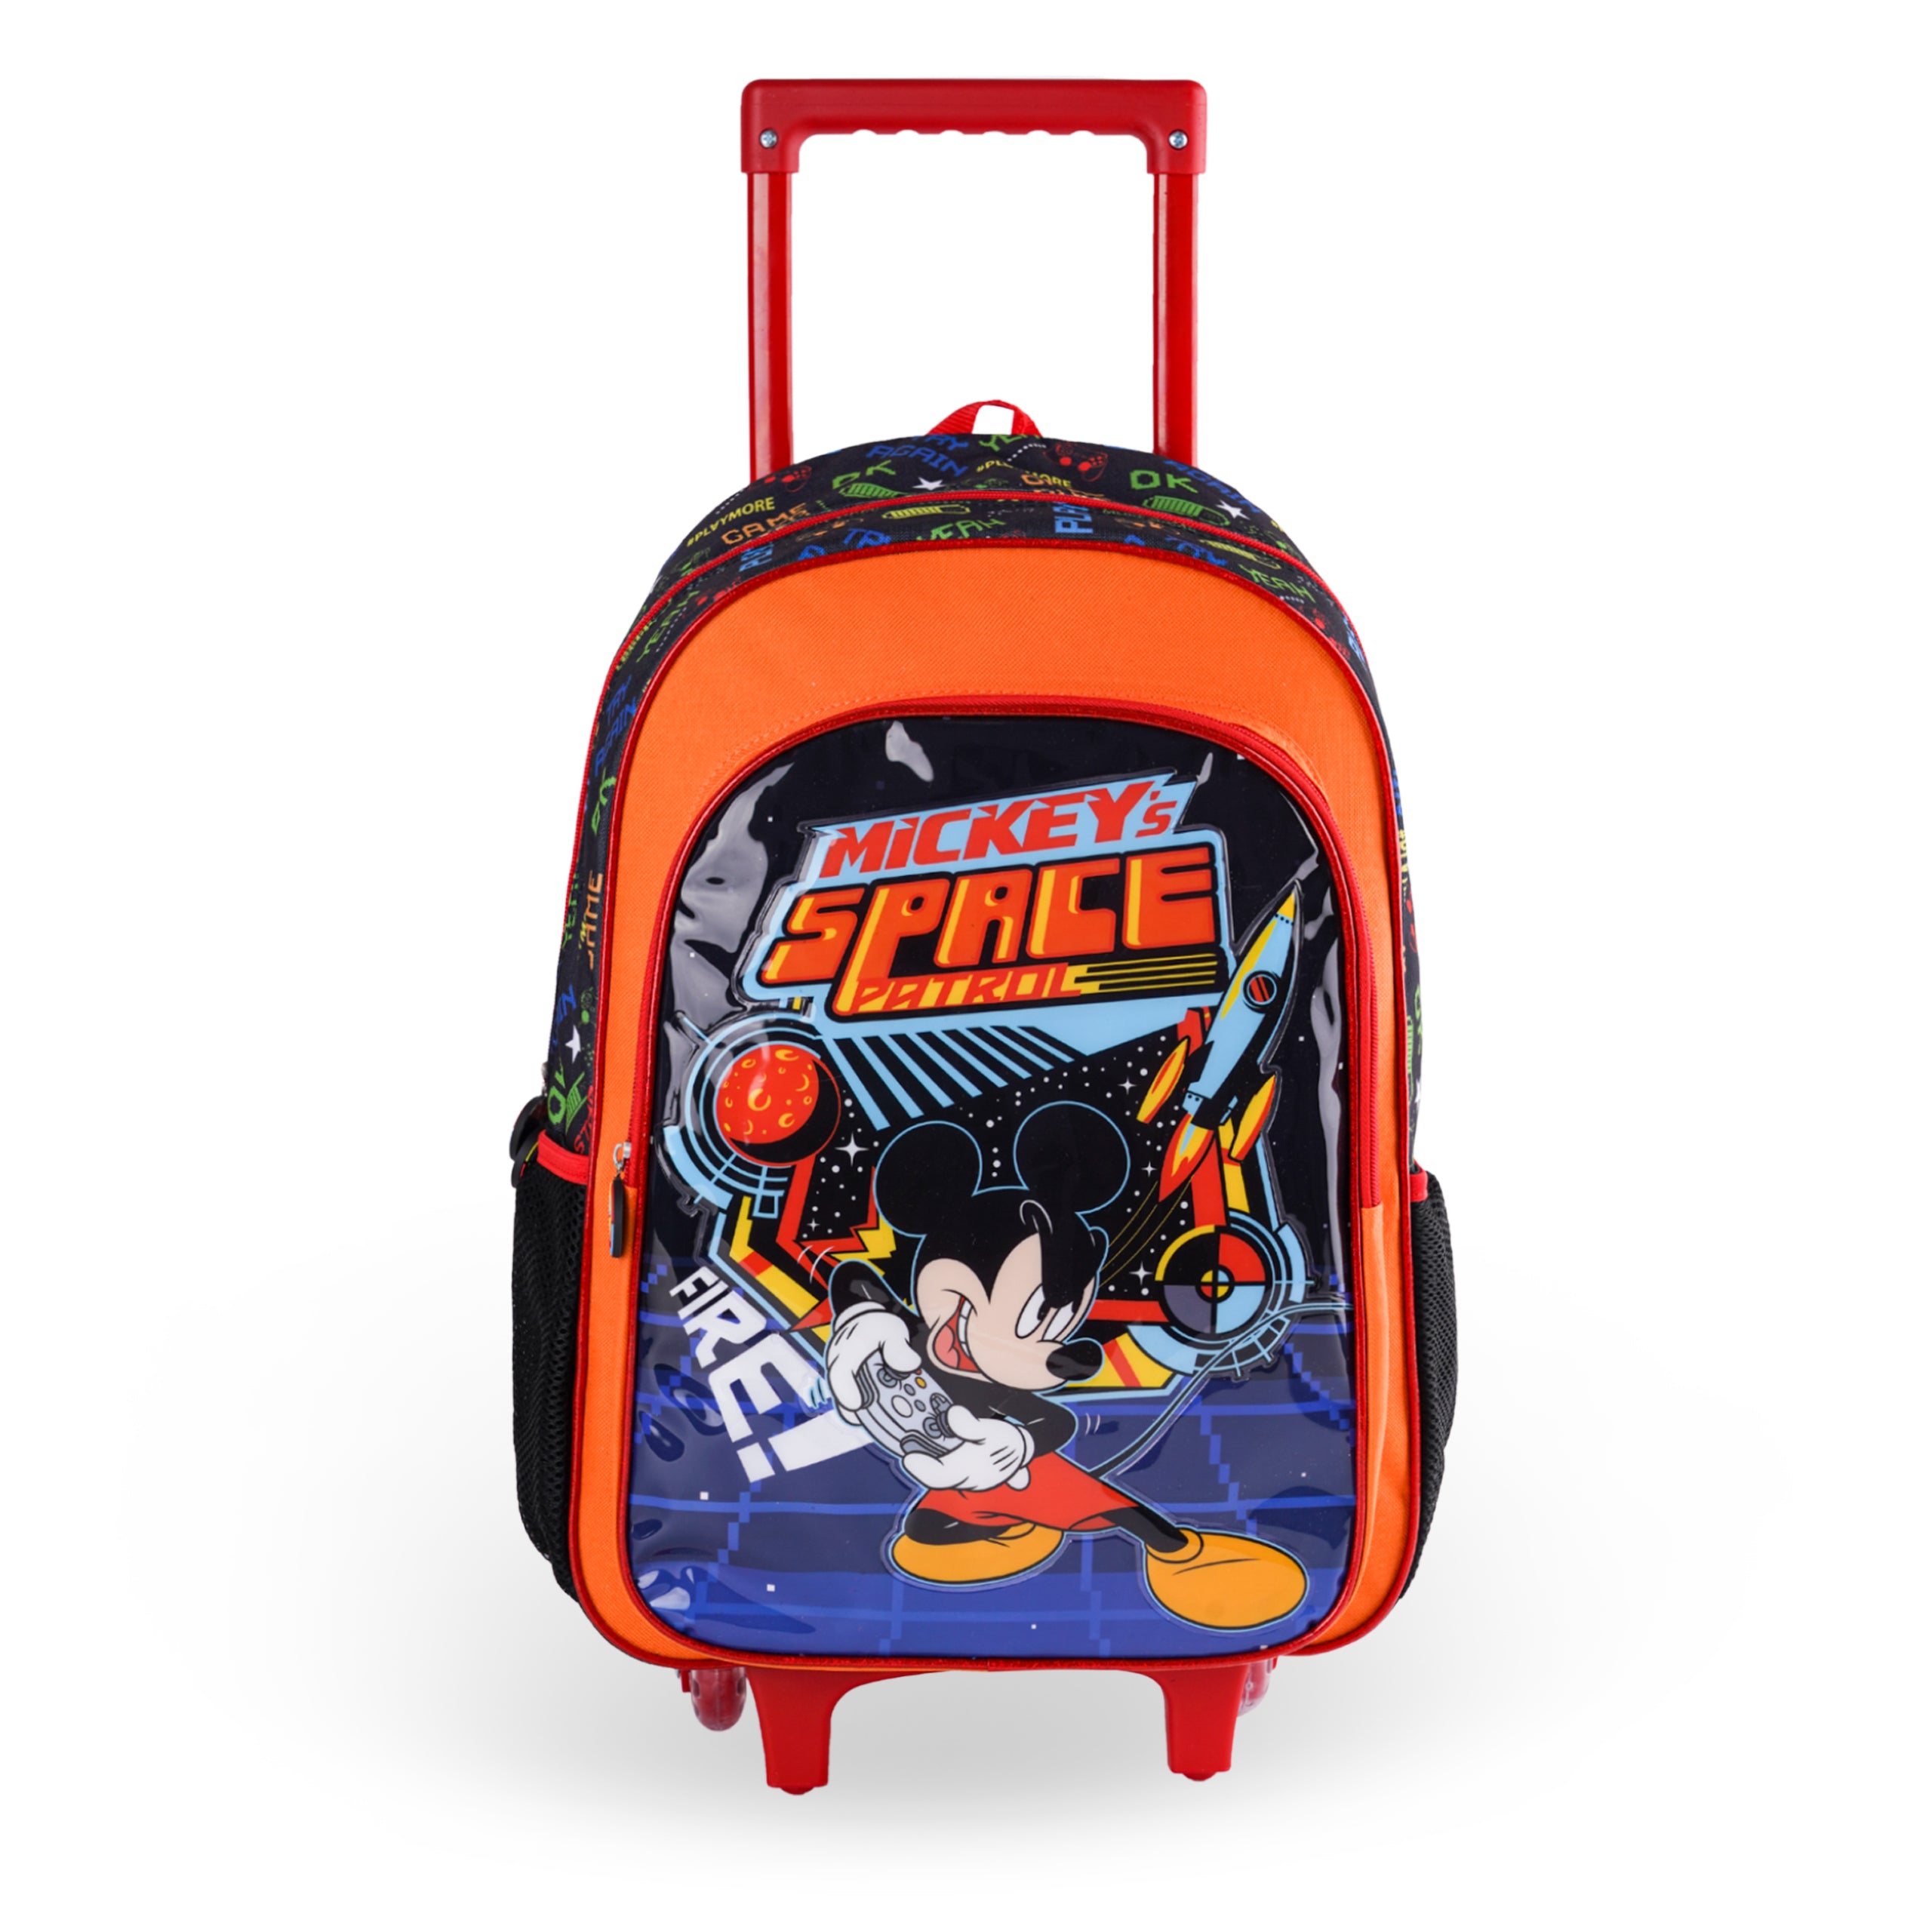 Disney Mickey Mouse Space Patrol 3in1 Trolley Box set 18"